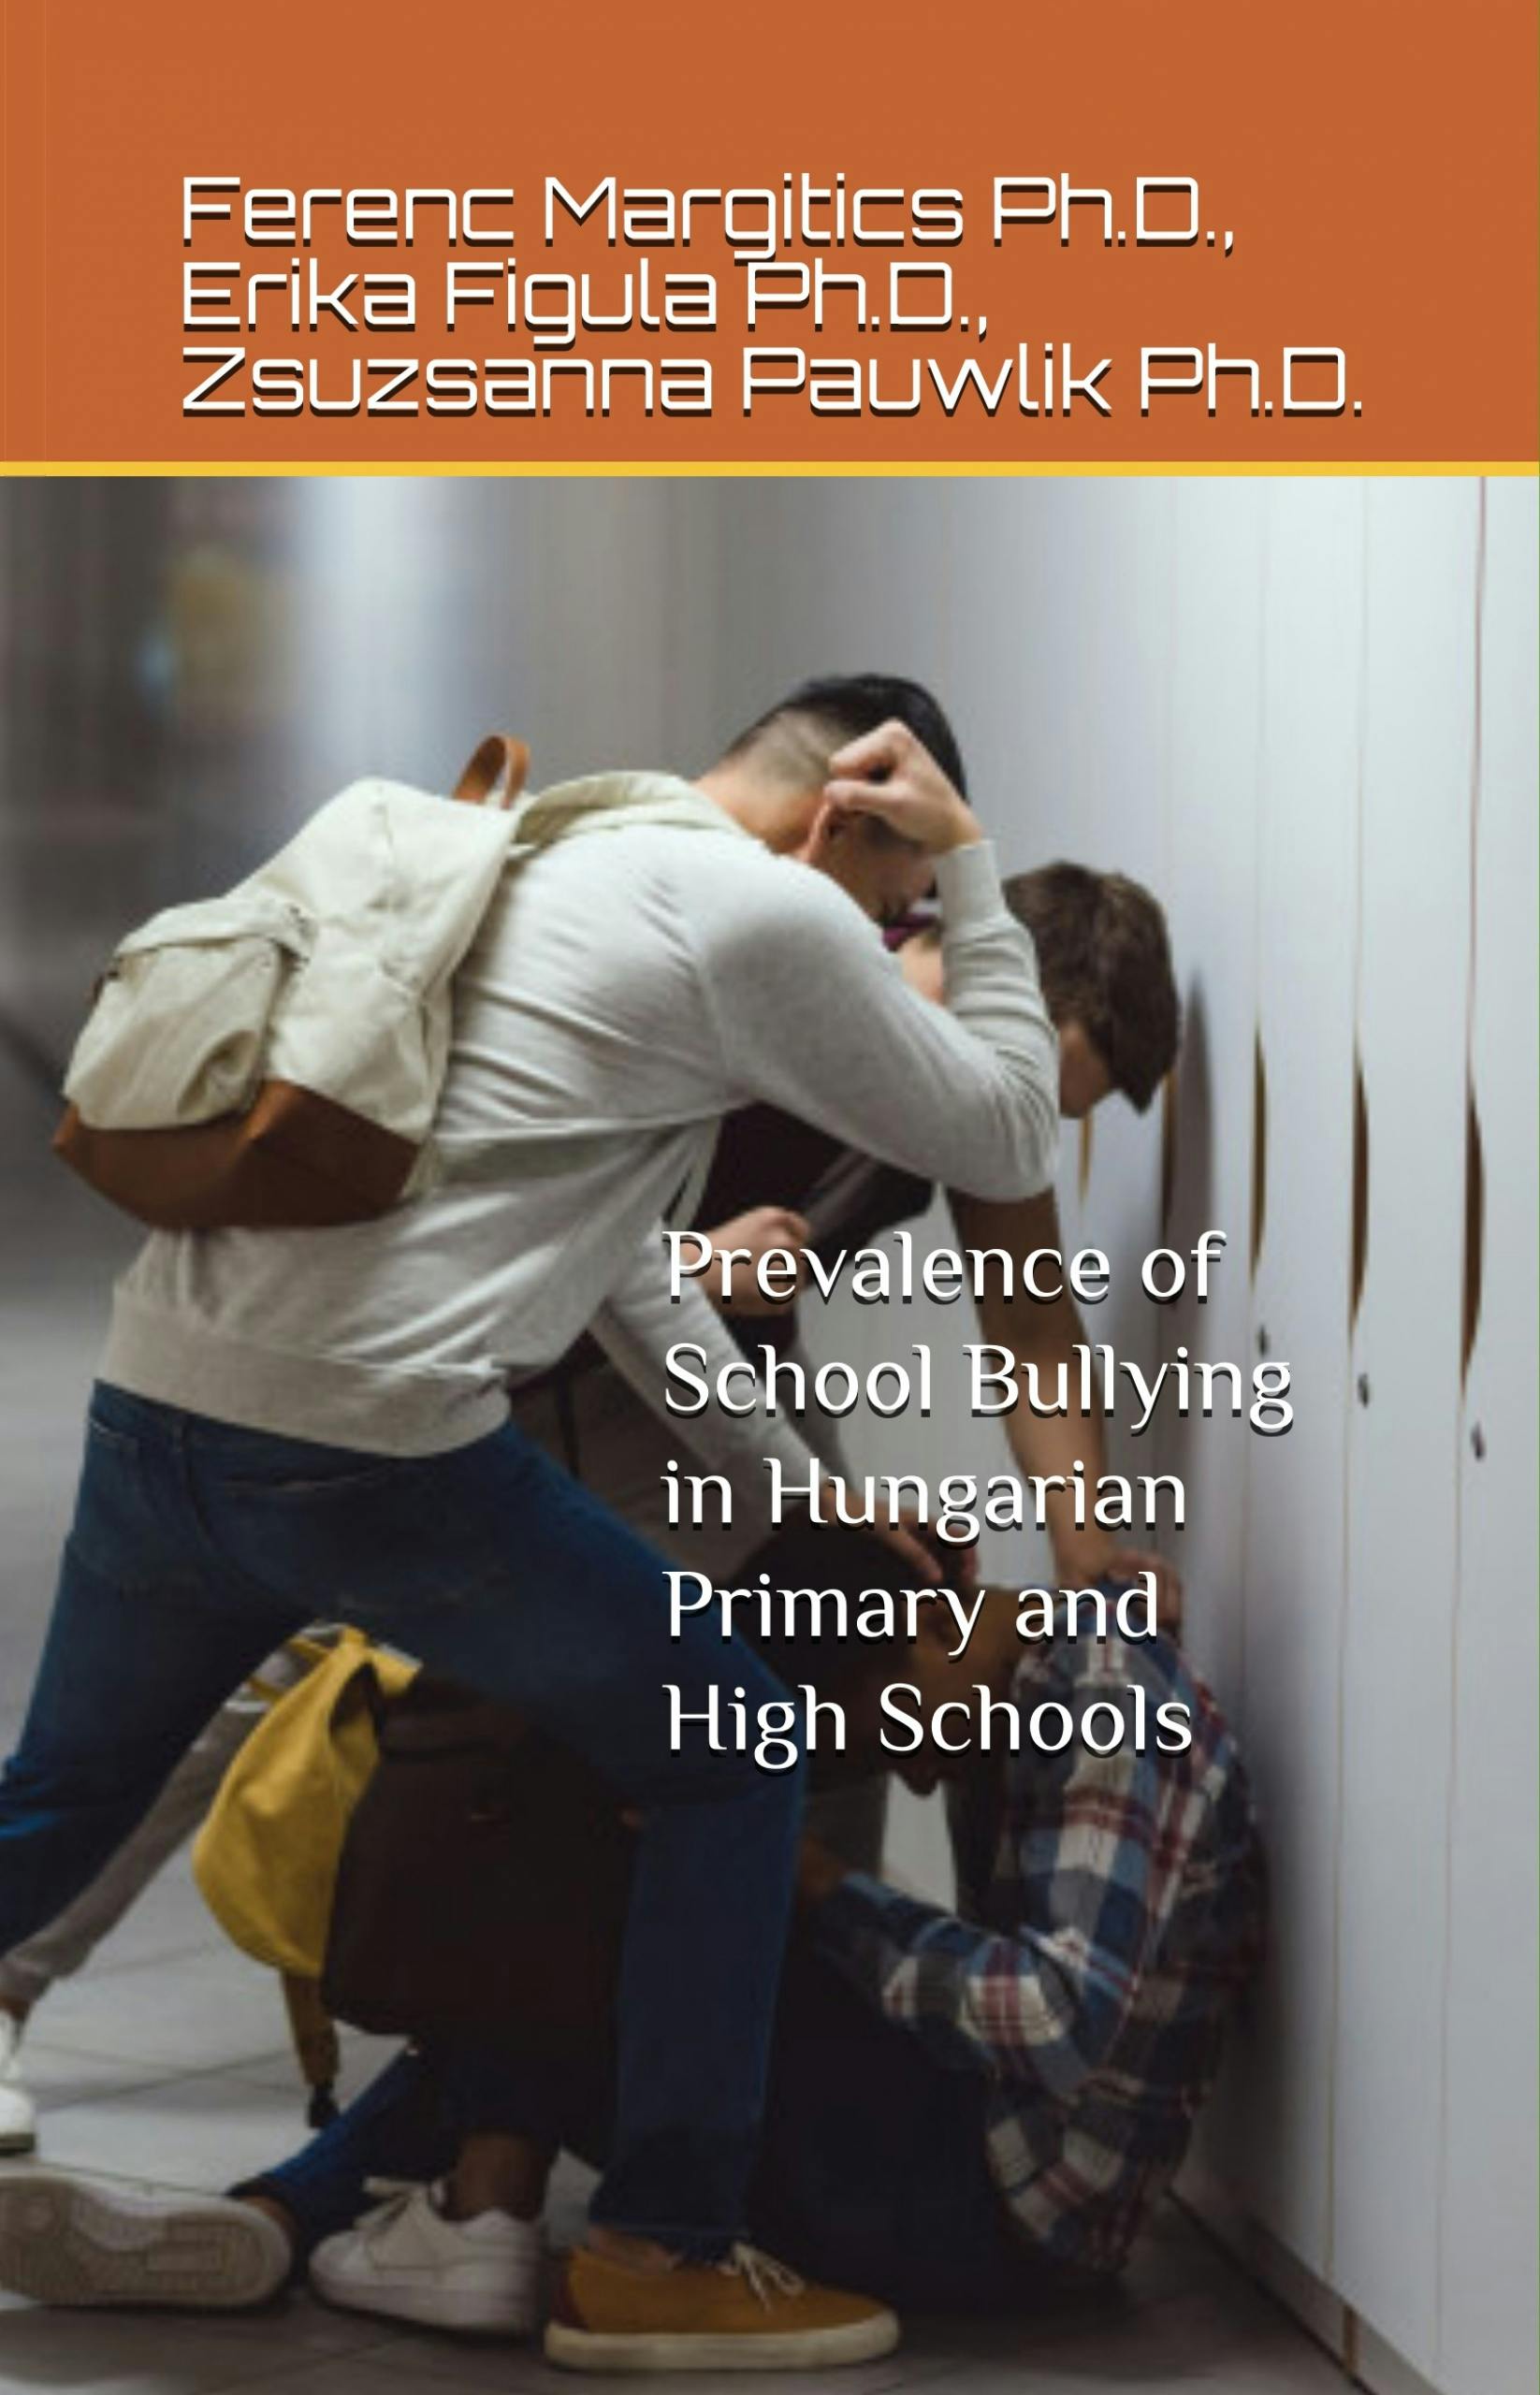 Prevalence of School Bullying in Hungarian Primary and High Schools - undefined